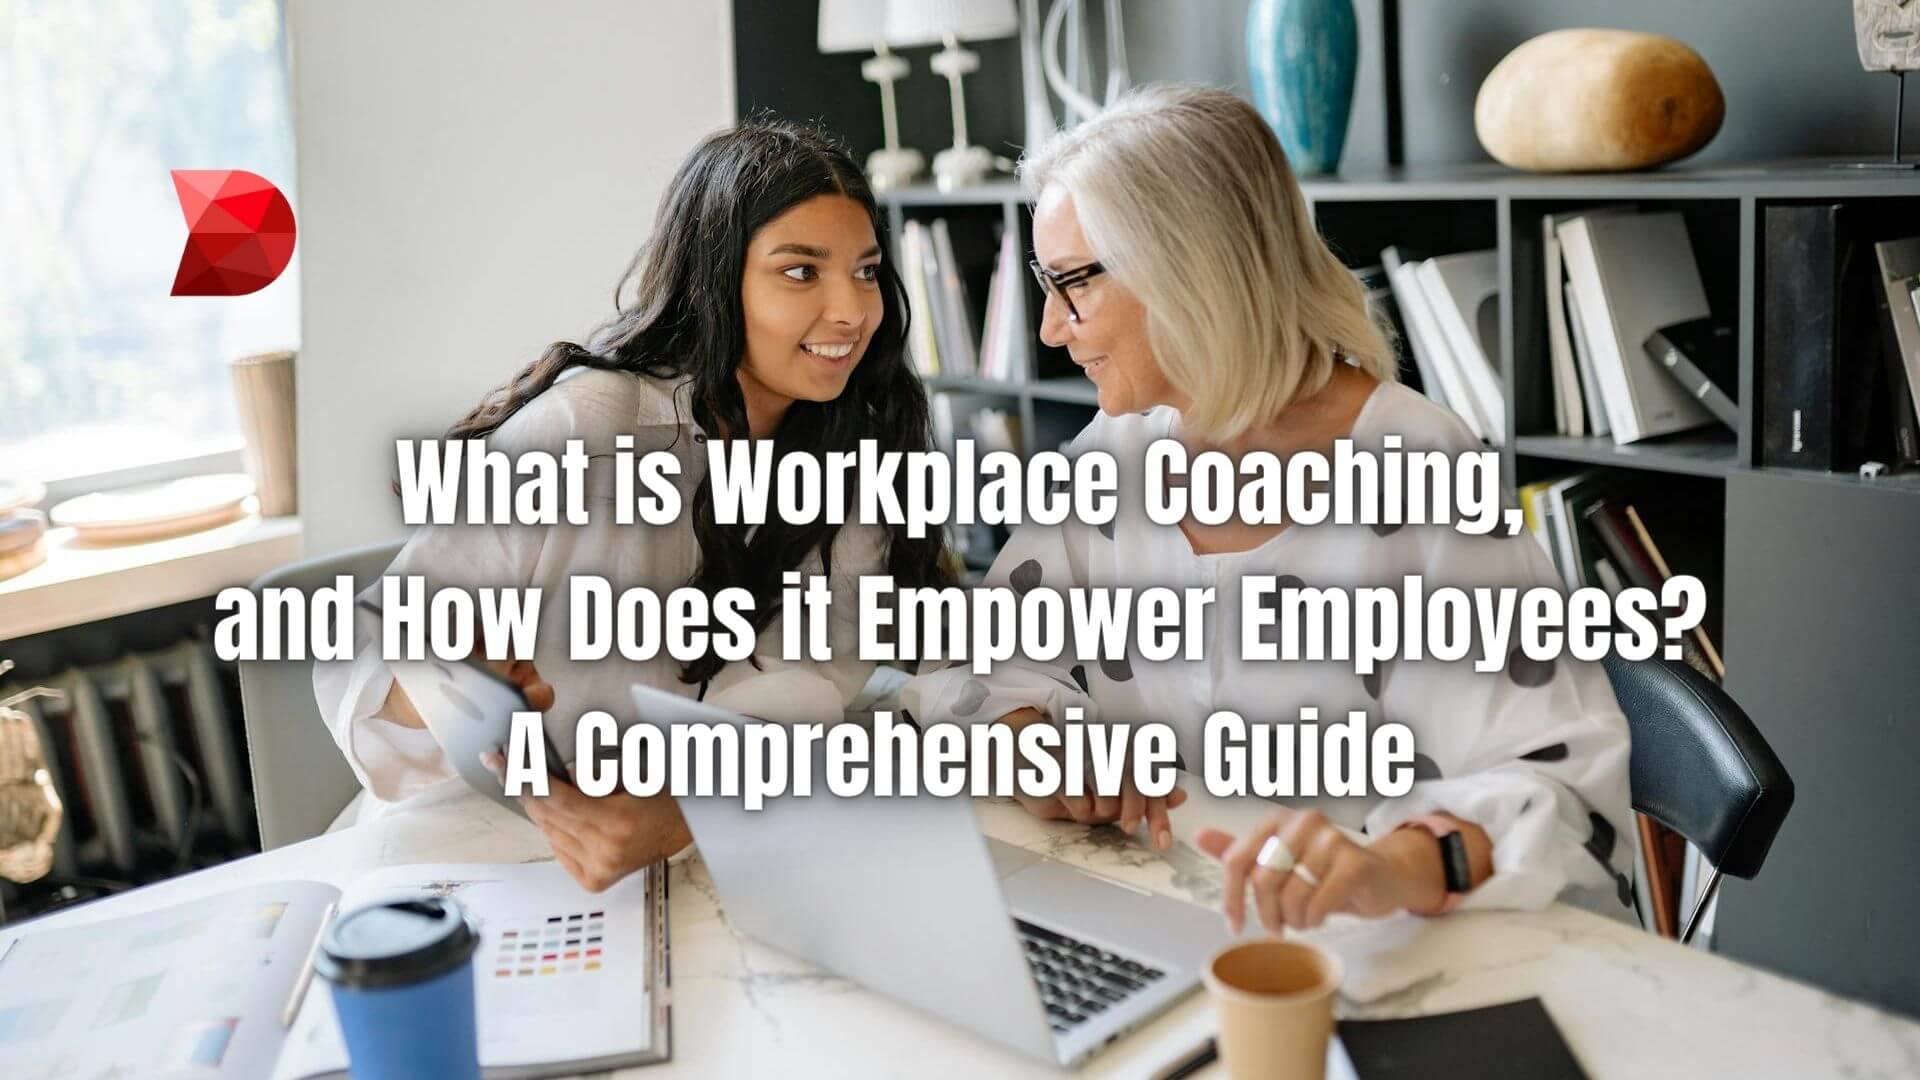 Unleash the potential of your team with workplace coaching. Learn how it empowers employees and fosters growth within your organization.